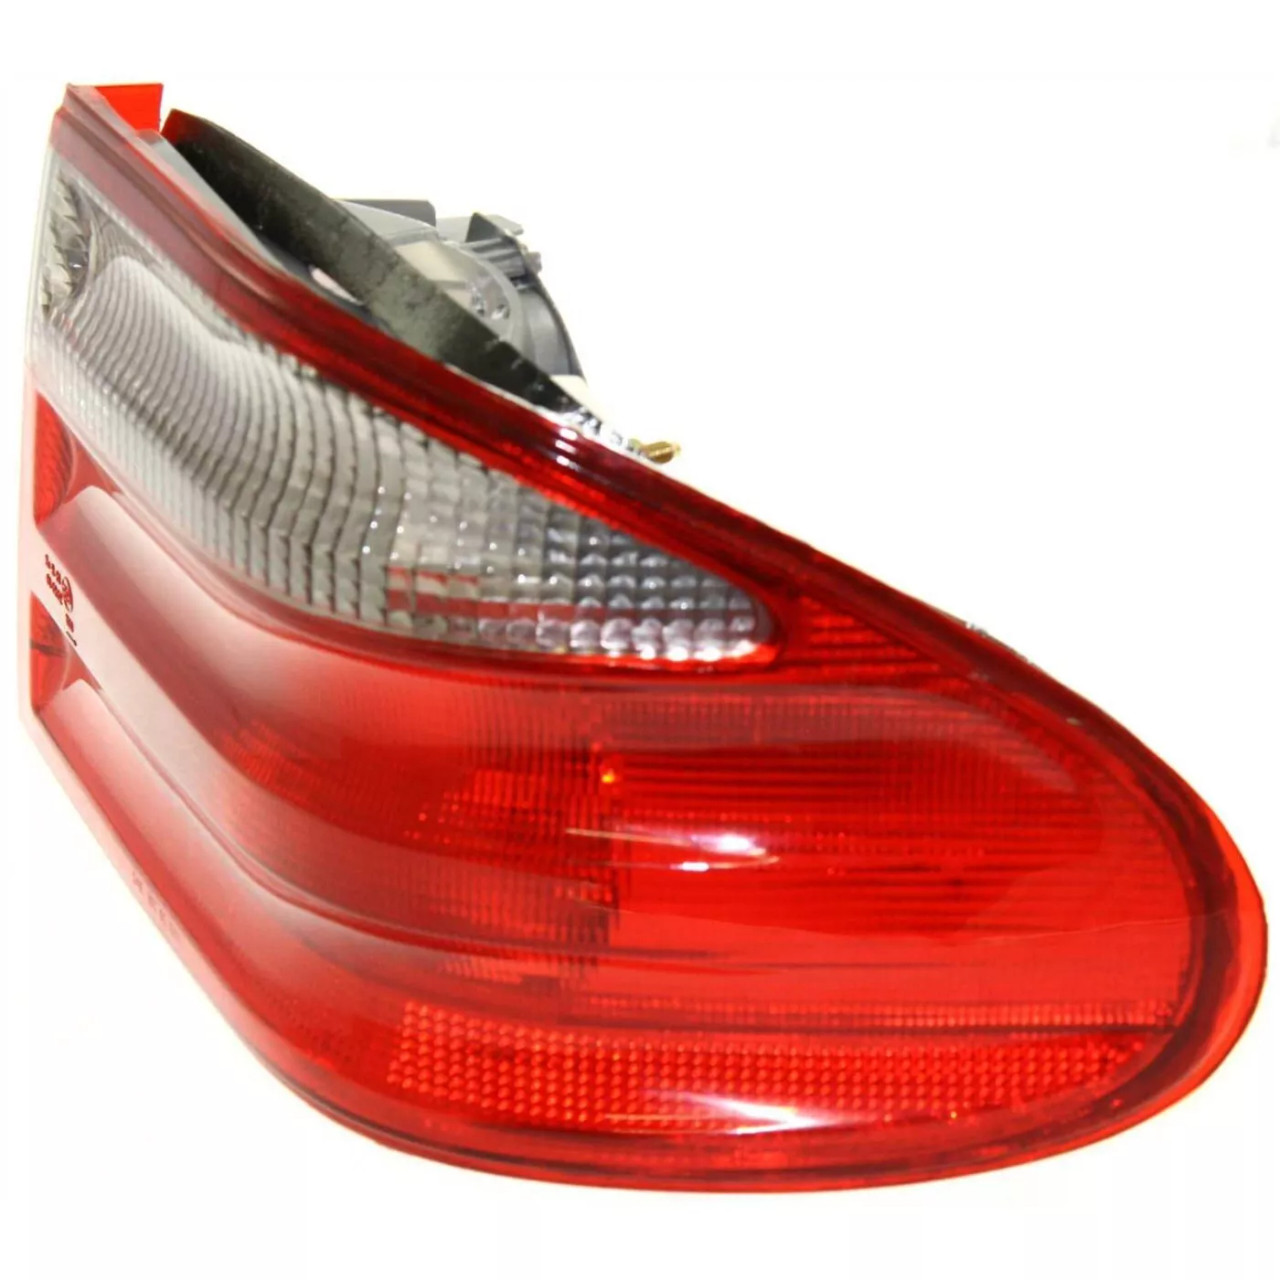 Halogen Tail Light Set For 2000-02 Mercedes Benz E320 Outer Clear/Red Lens 2Pcs